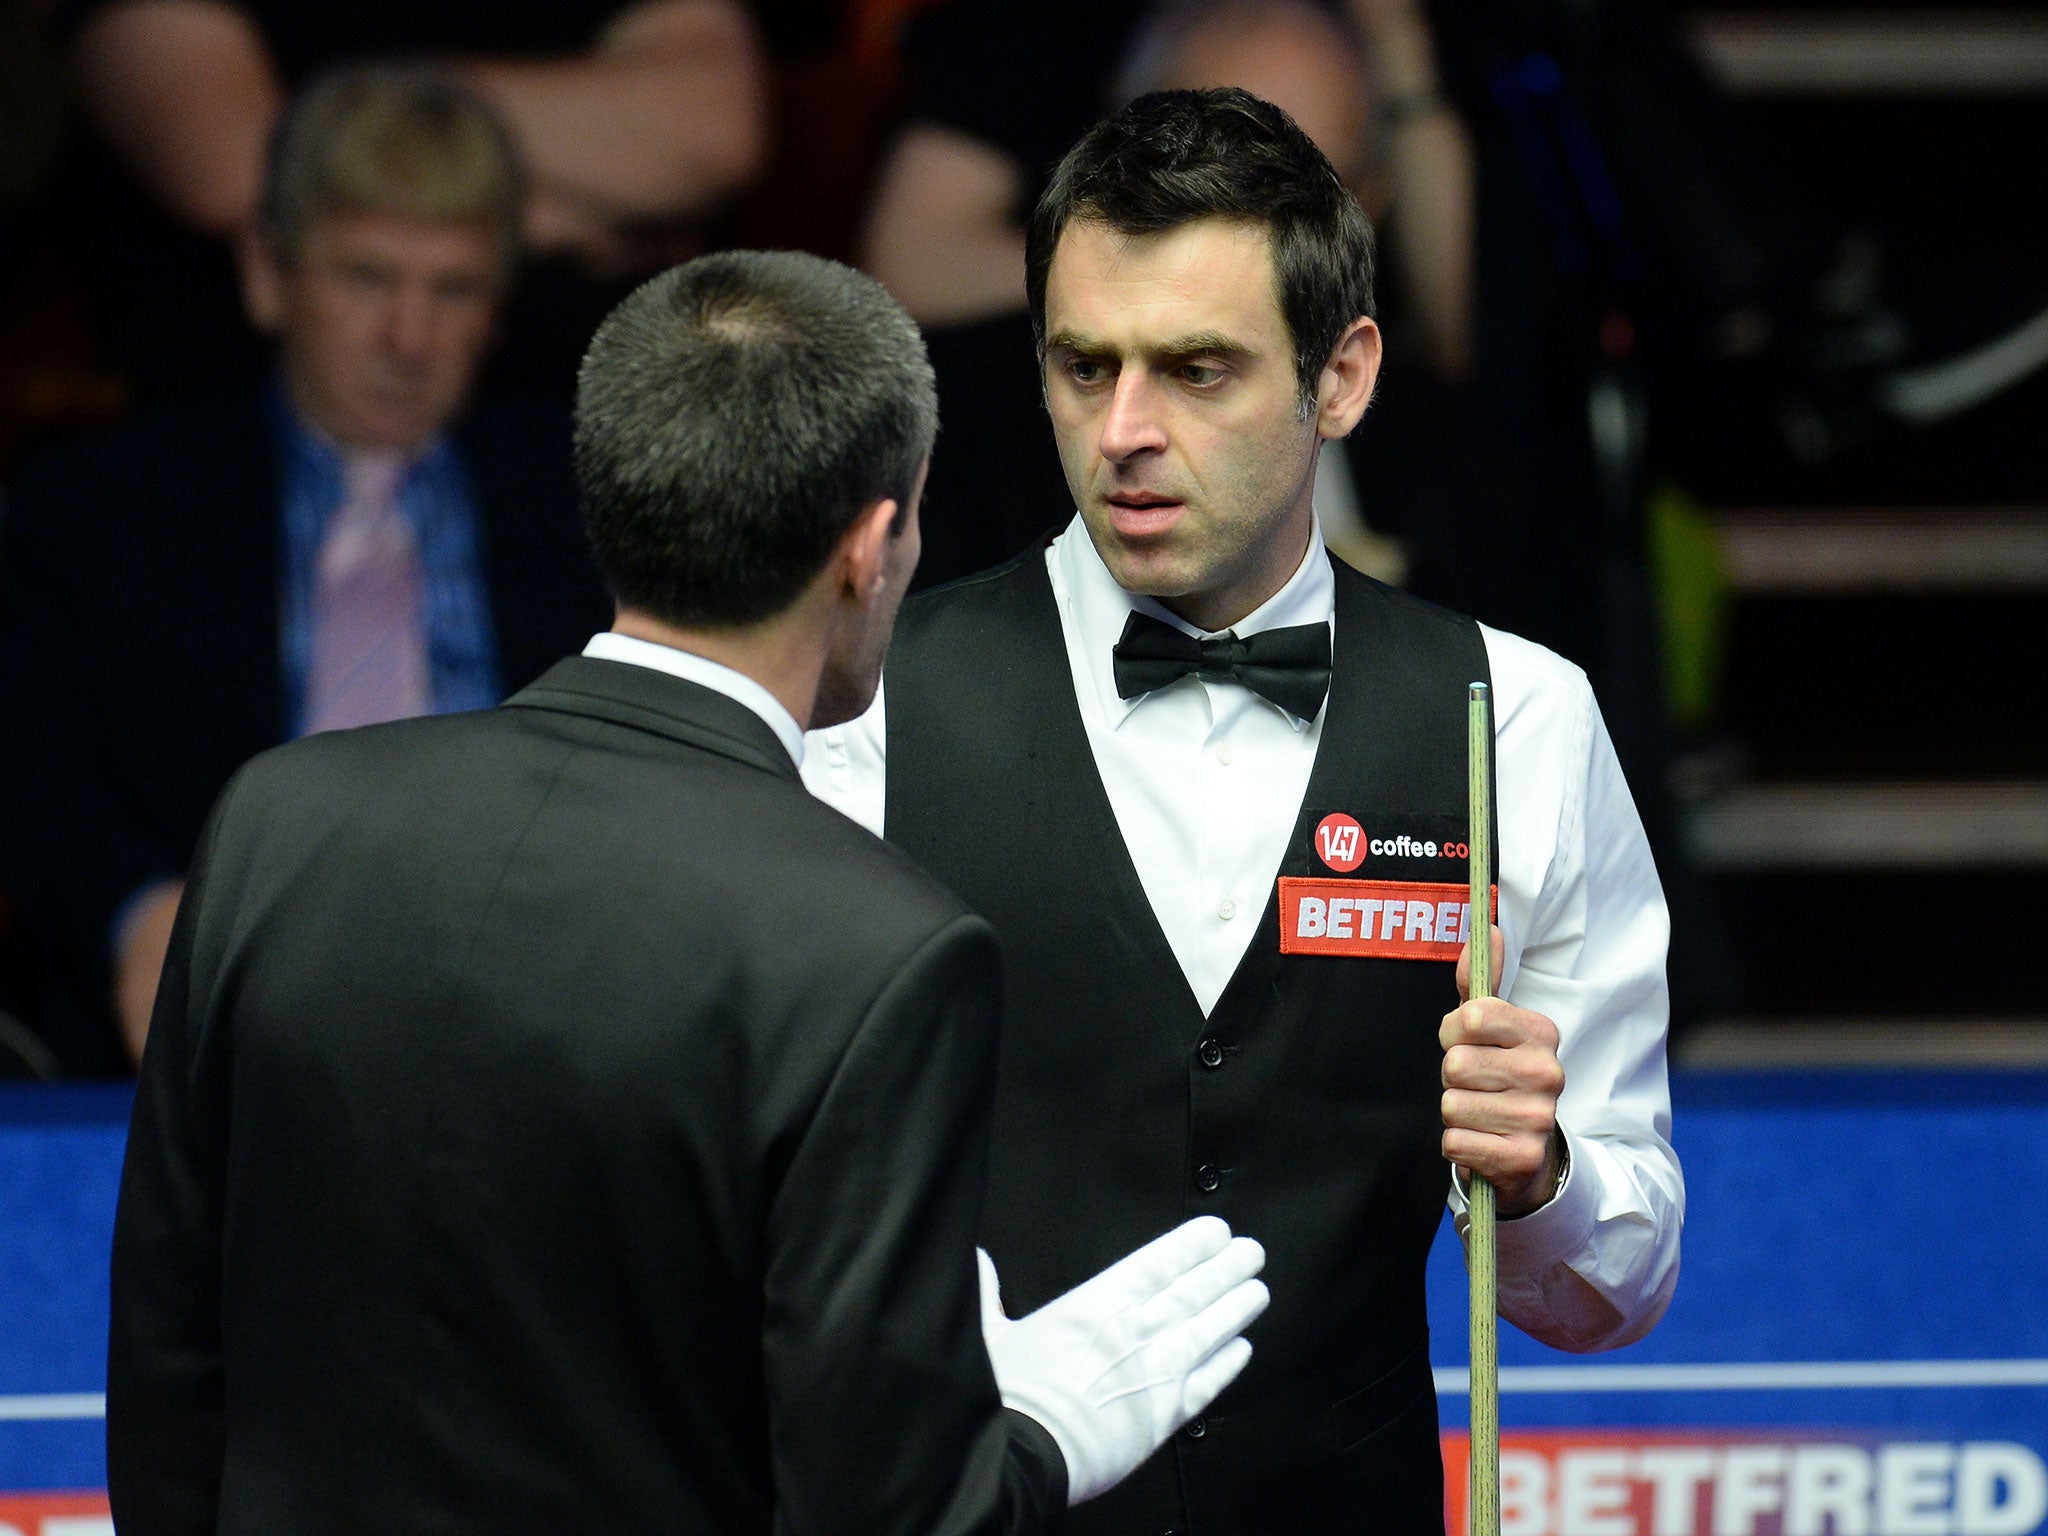 Ronnie O’Sullivan has a 12-4 lead over Matthew Stevens, needing one more frame to win